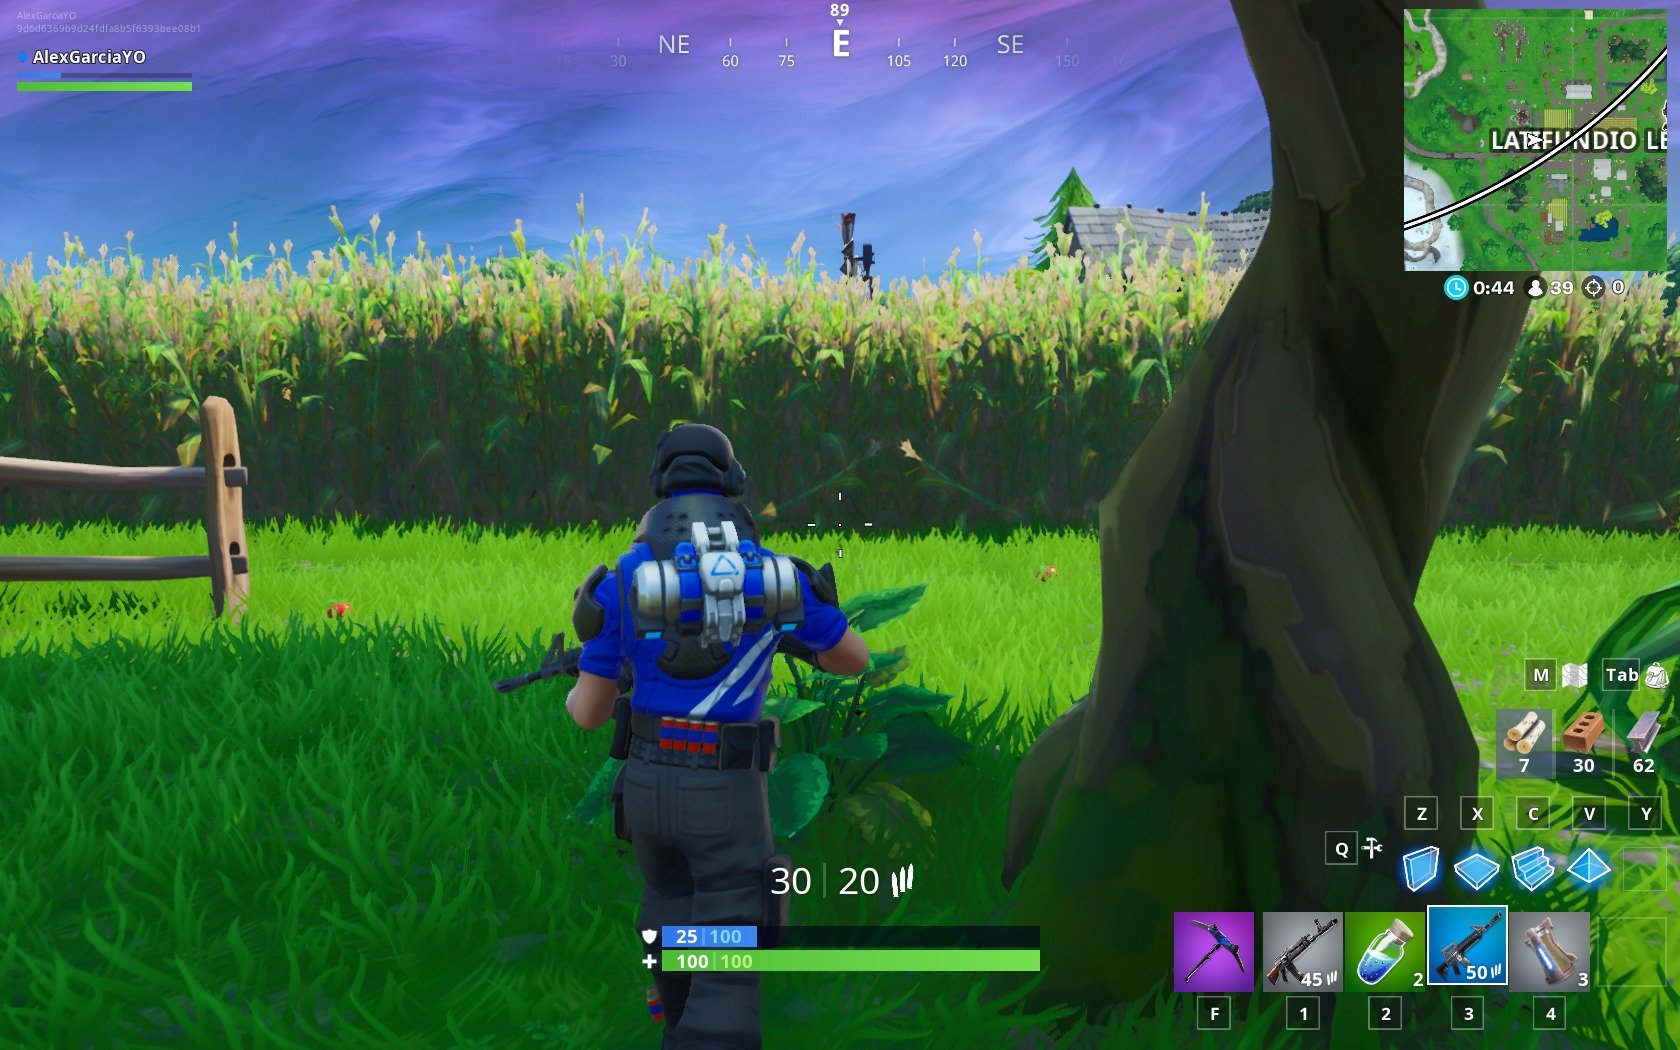 Download Fortnite 7.9.2 for PC - Free